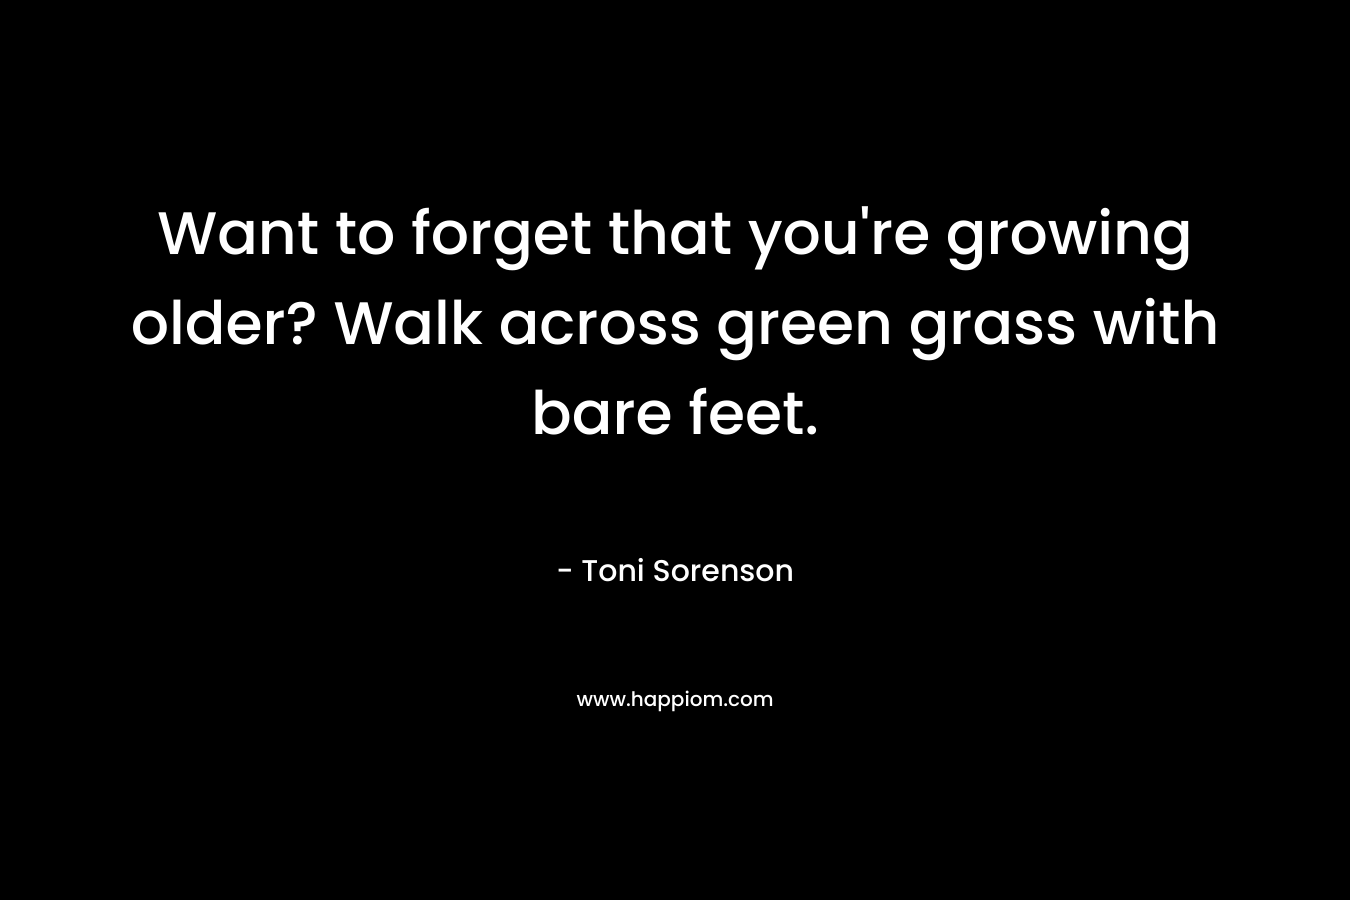 Want to forget that you’re growing older? Walk across green grass with bare feet. – Toni Sorenson